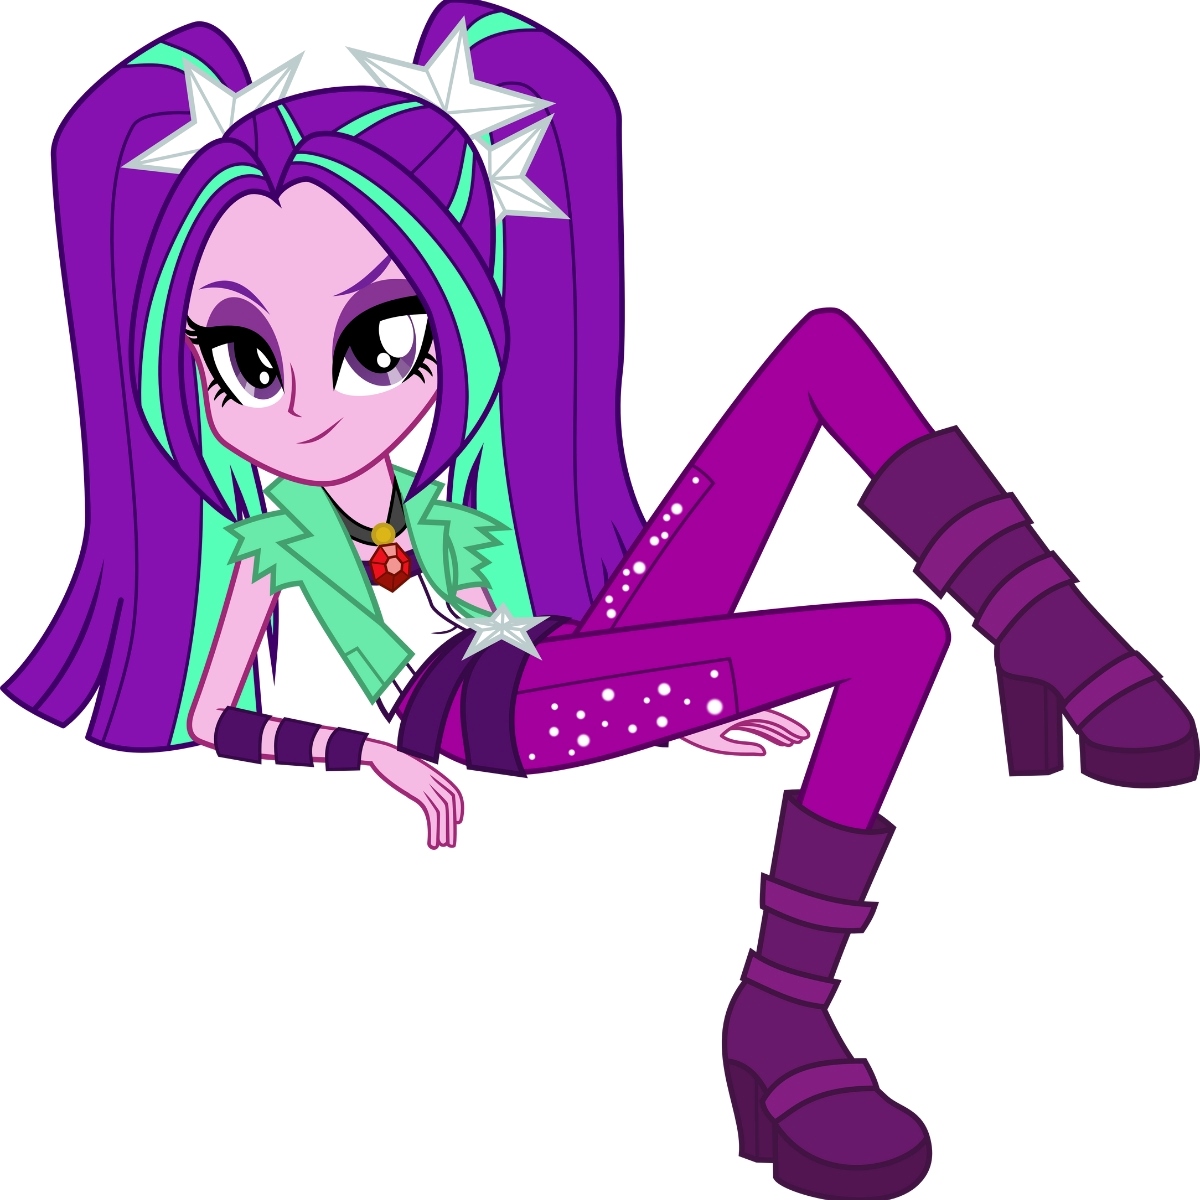 17 Facts About Aria Blaze (My Little Pony: Equestria Girls